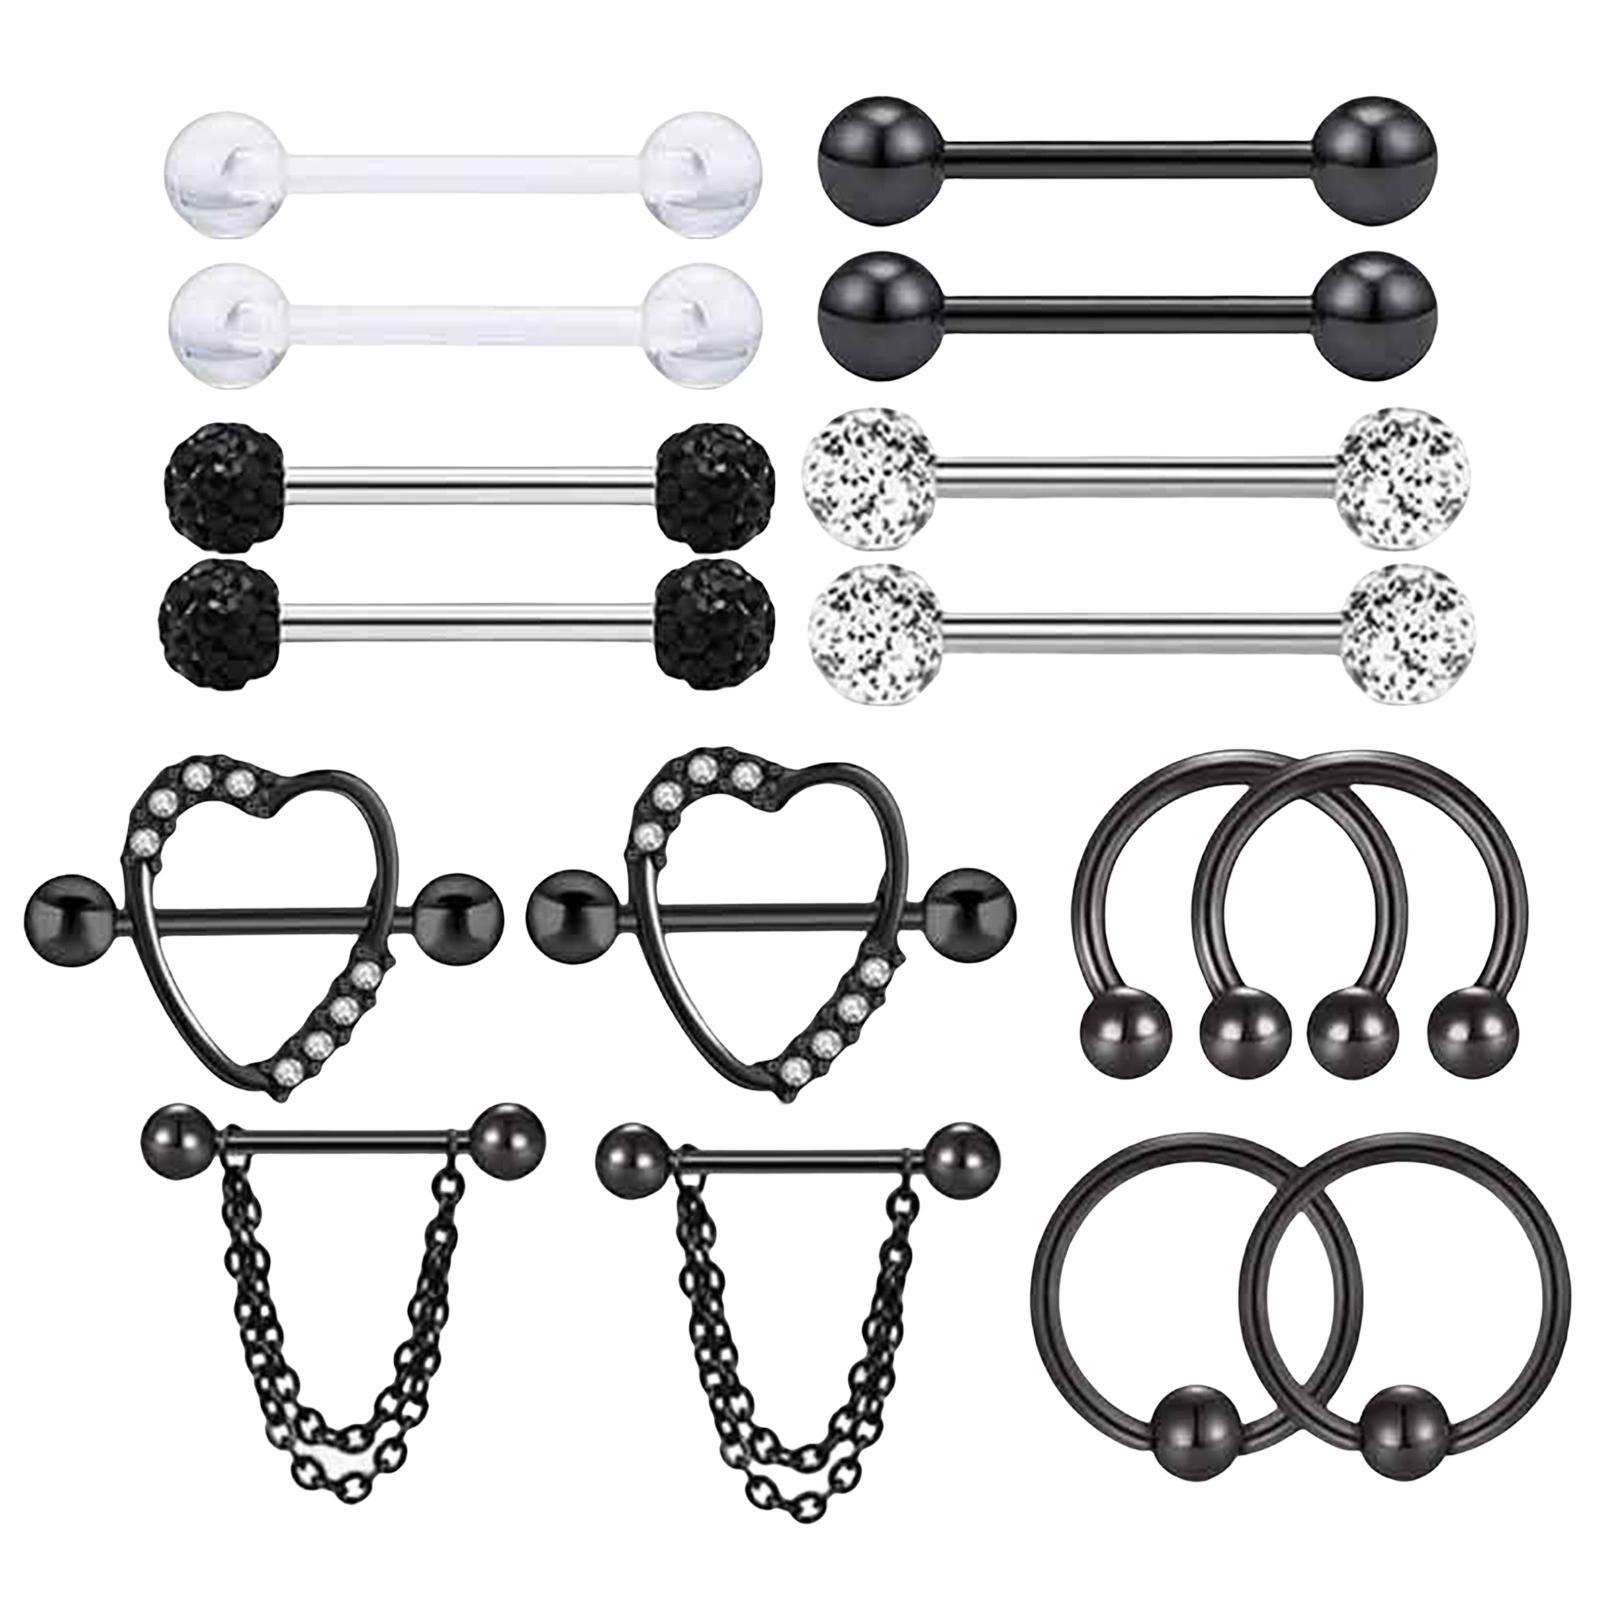 8 Pairs Pierced Body Jewelry Barbell Pierced Bar Stainless Steel for Women